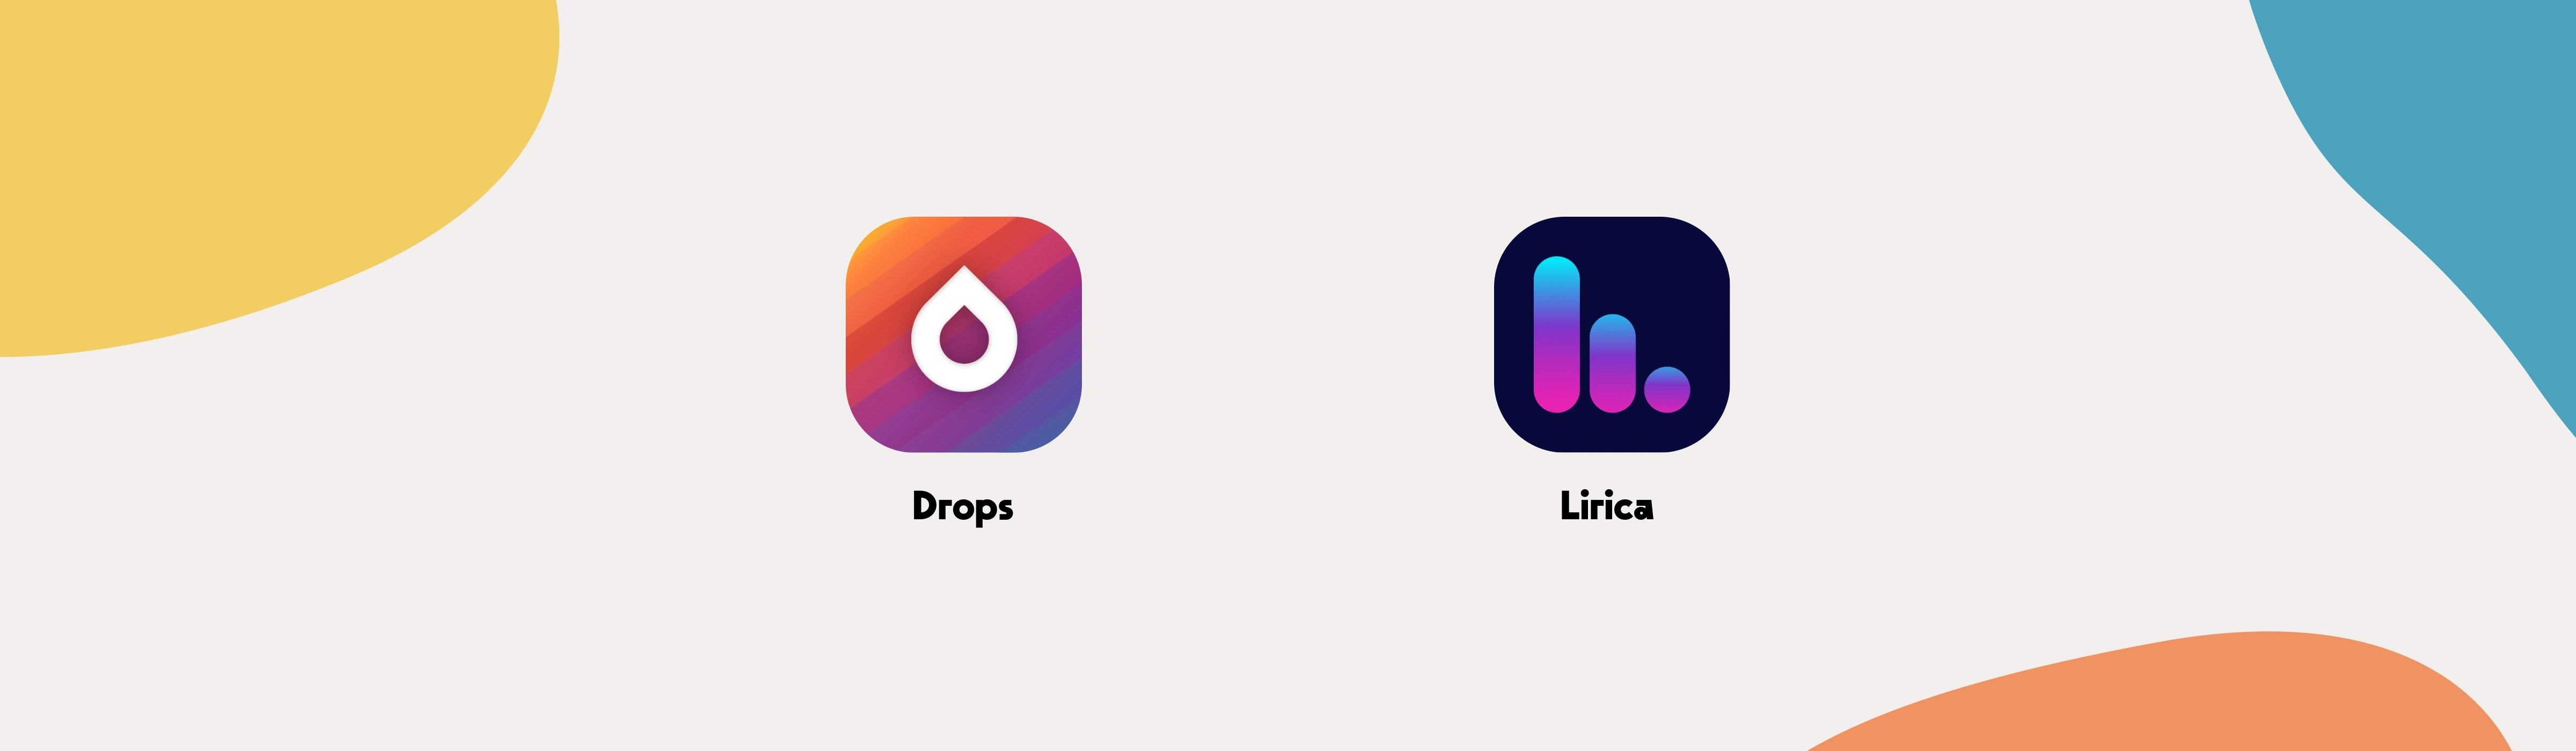 Logos of Drops and Lirica apps